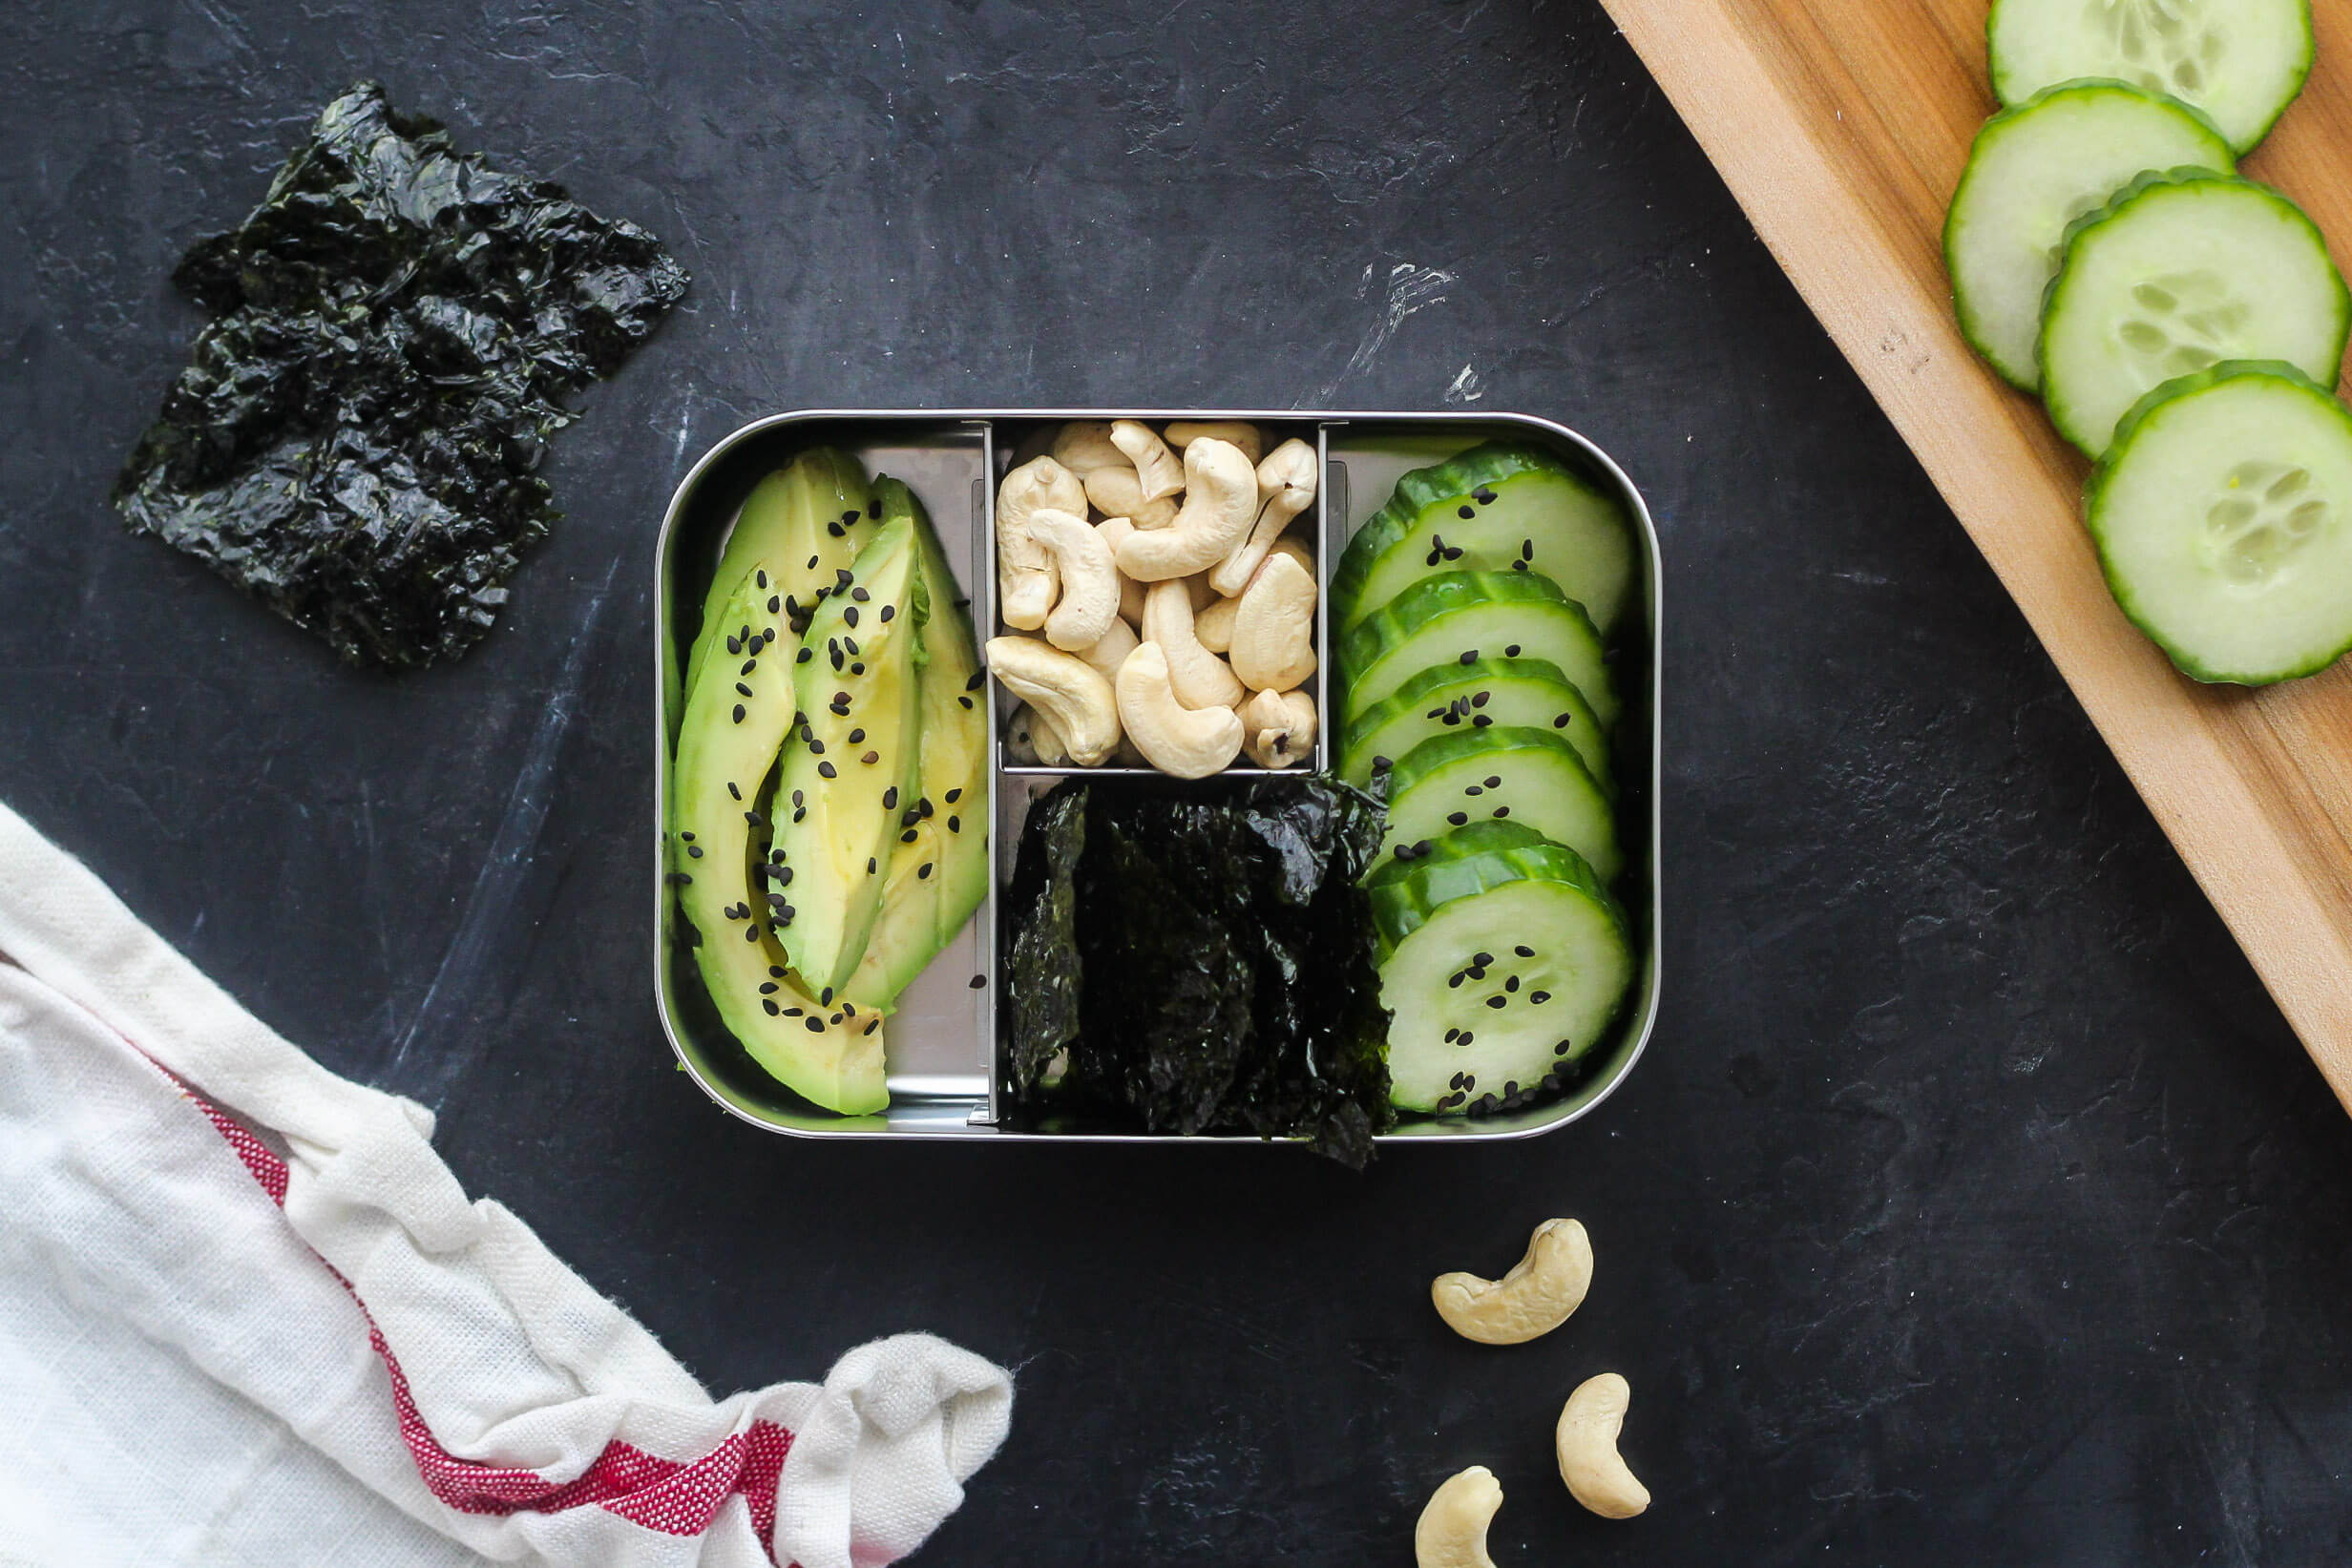 20 Family-Friendly Meals Your Clients Will Love: Avocado, Cucumber & Nori Snack Box